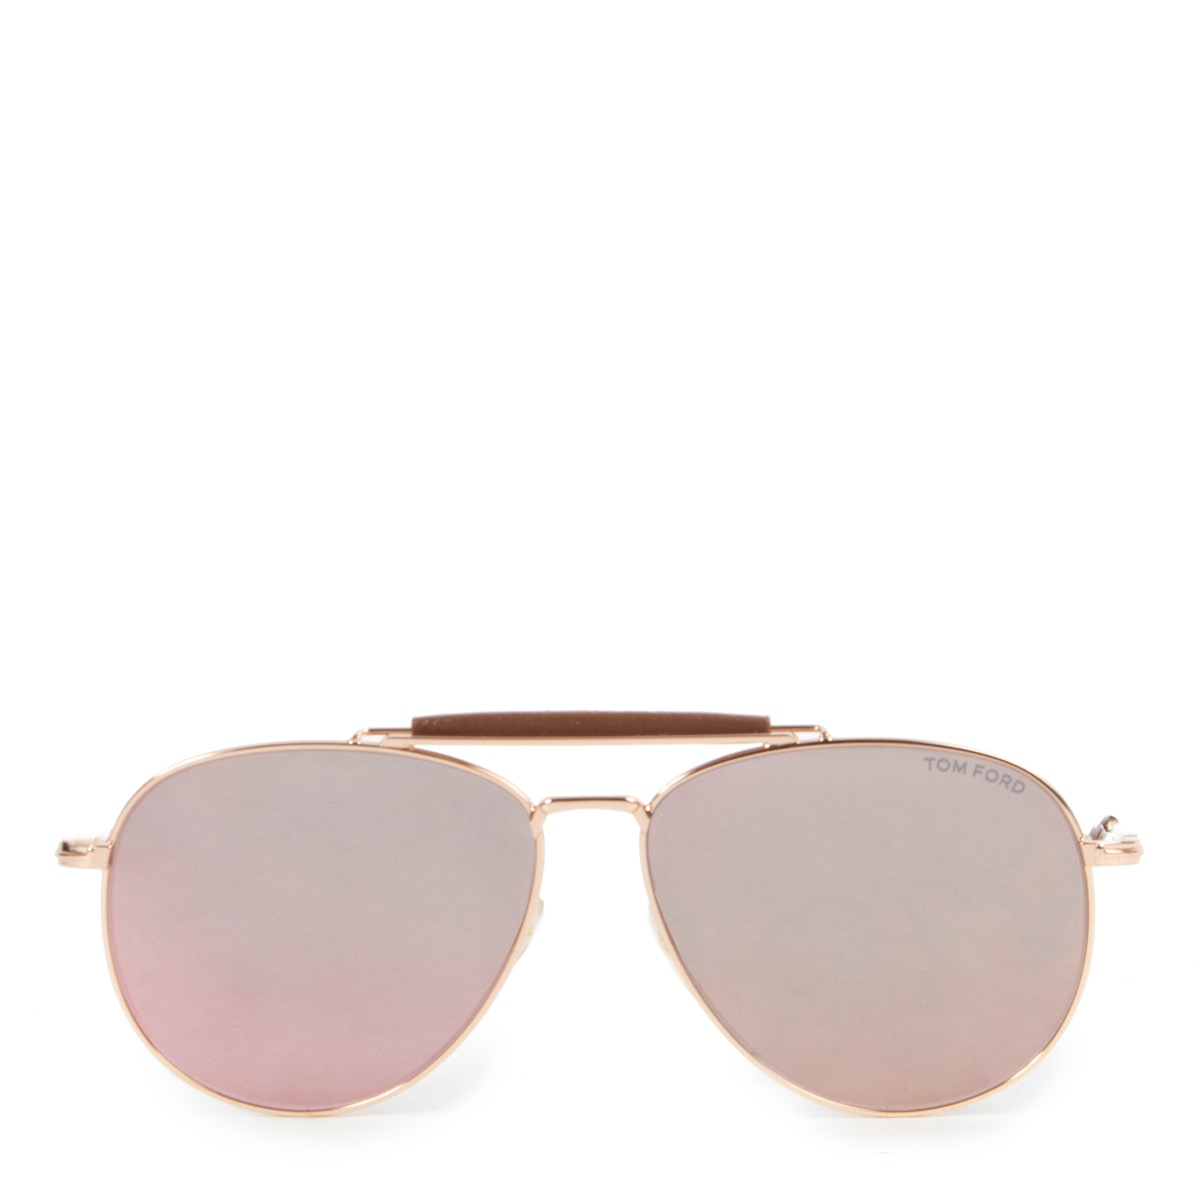 Tom Ford Rose Gold Sunglasses ○ Labellov ○ Buy and Sell Authentic Luxury